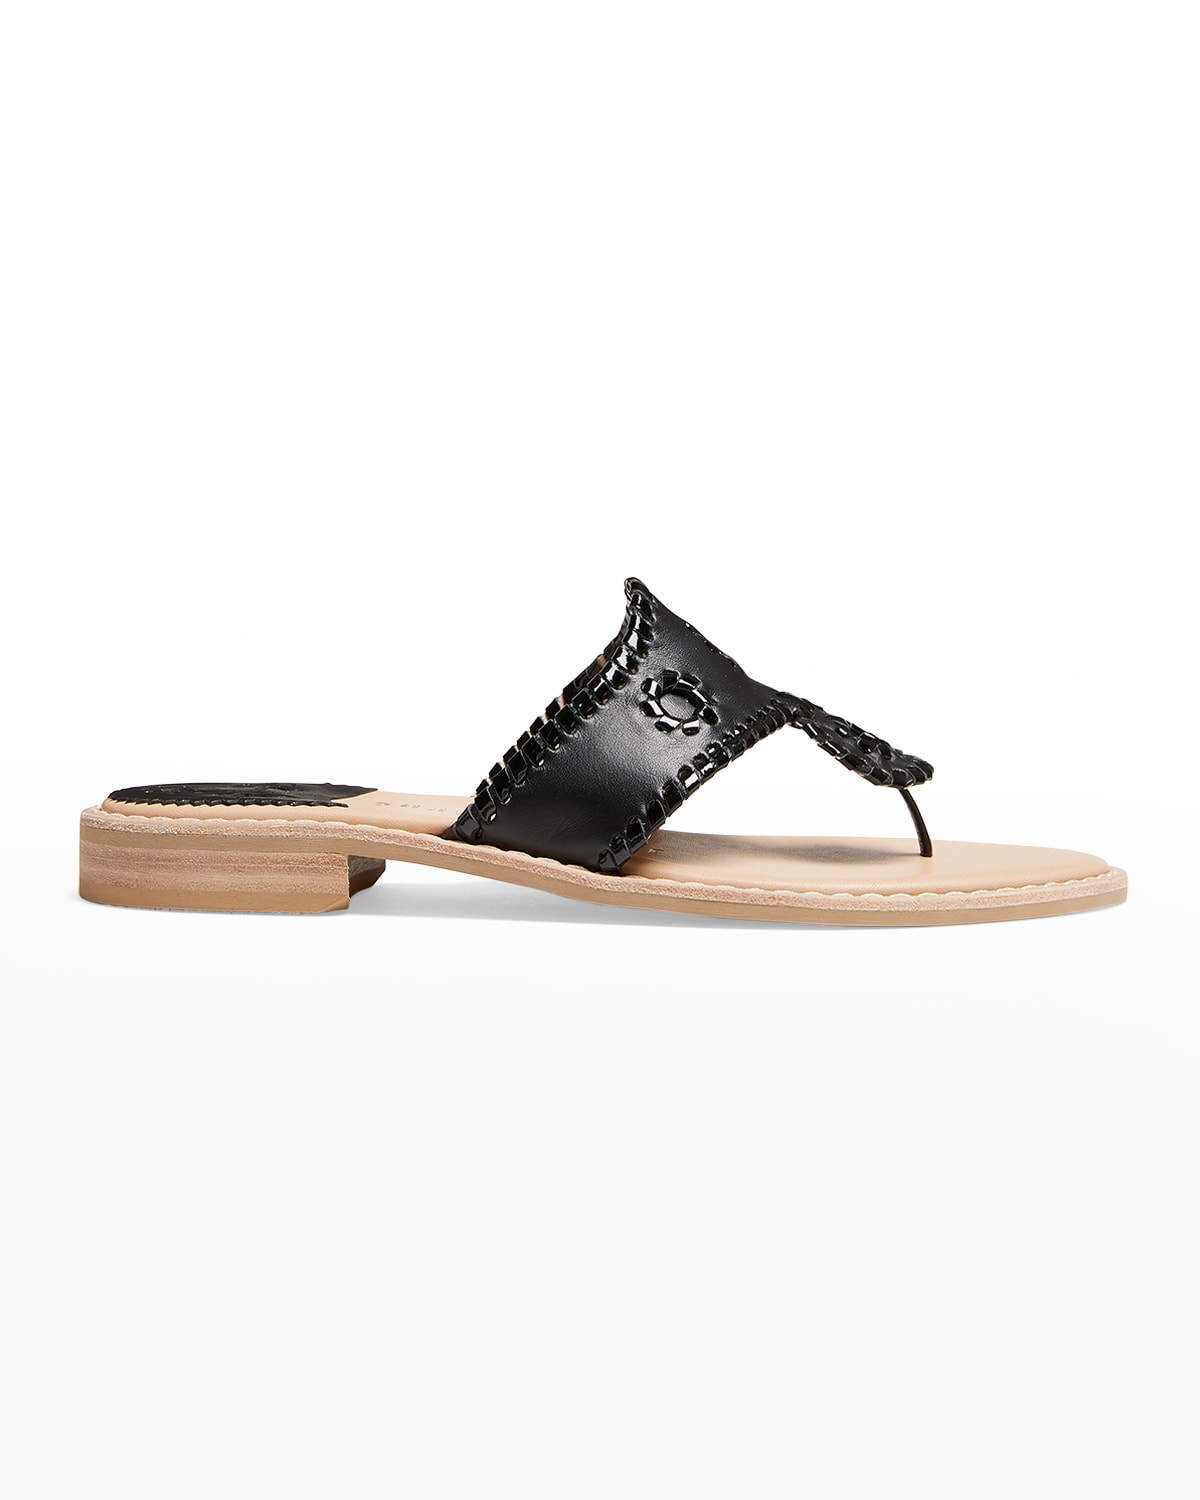 Jack Rogers Jacks Woven Leather Thong Sandals In Black/ Black Pate